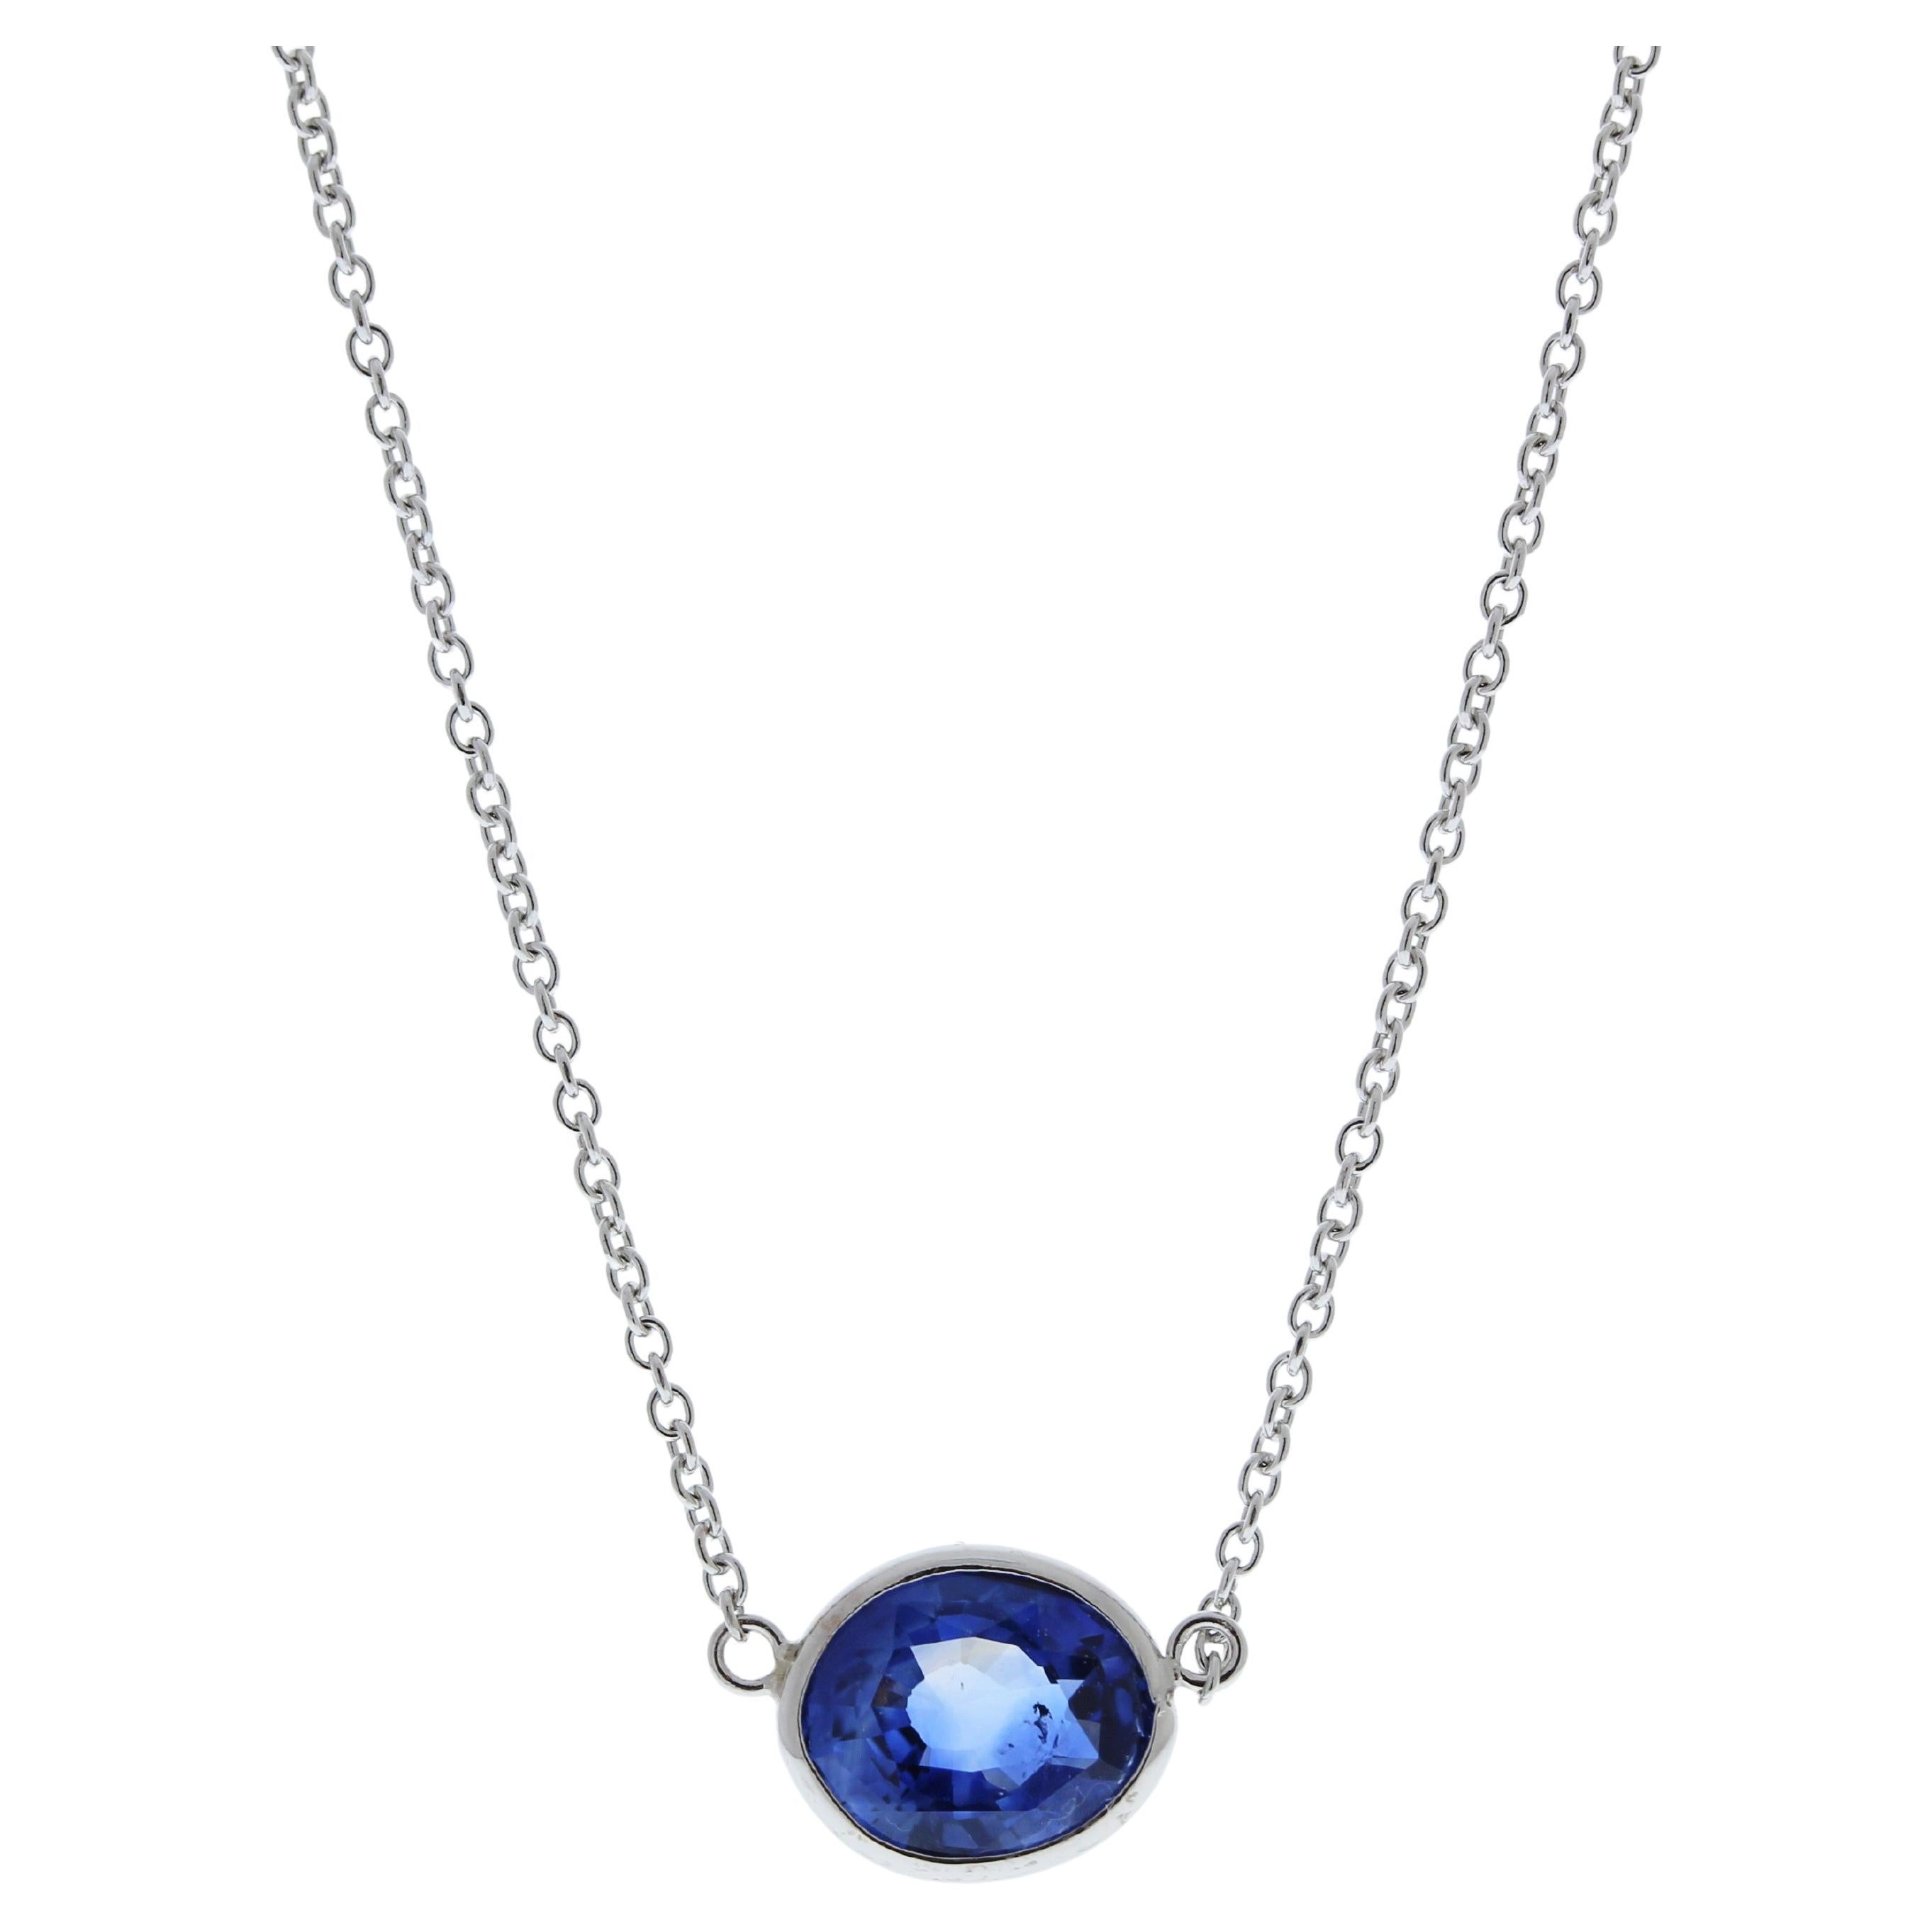 2.76 Carat Oval Sapphire Blue Fashion Necklaces In 14k White Gold For Sale